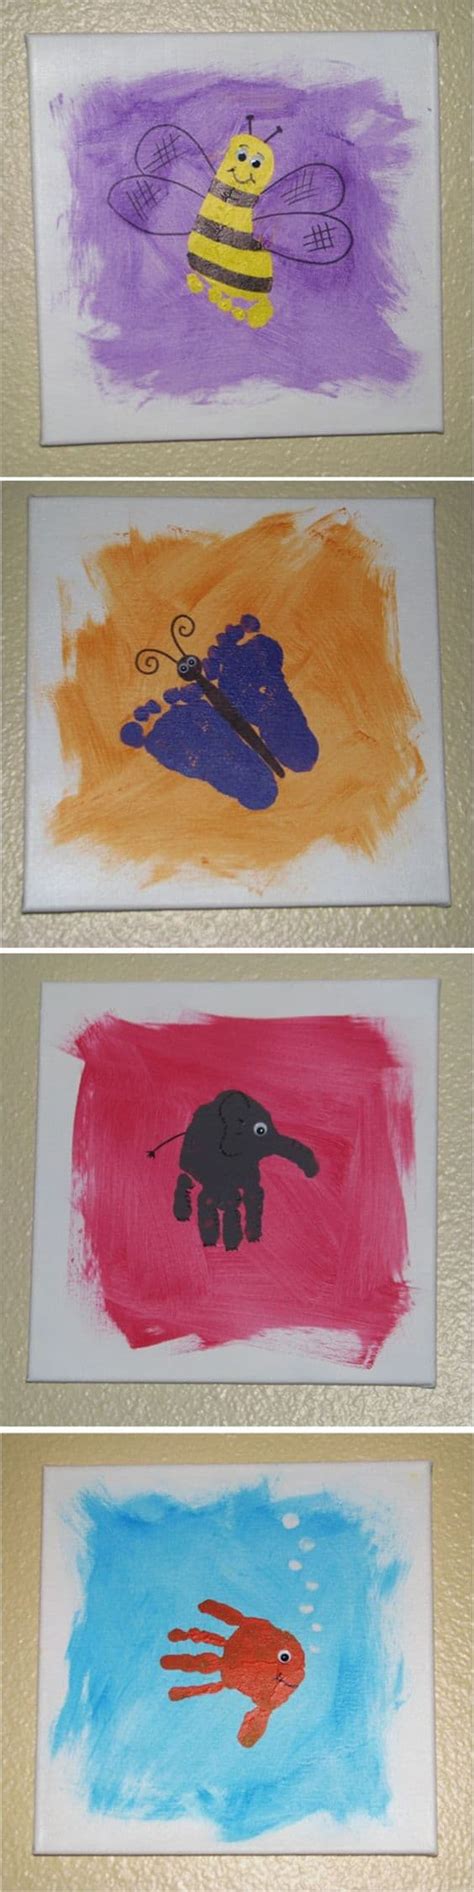 19 Fun And Easy Painting Ideas For Kids Homesthetics